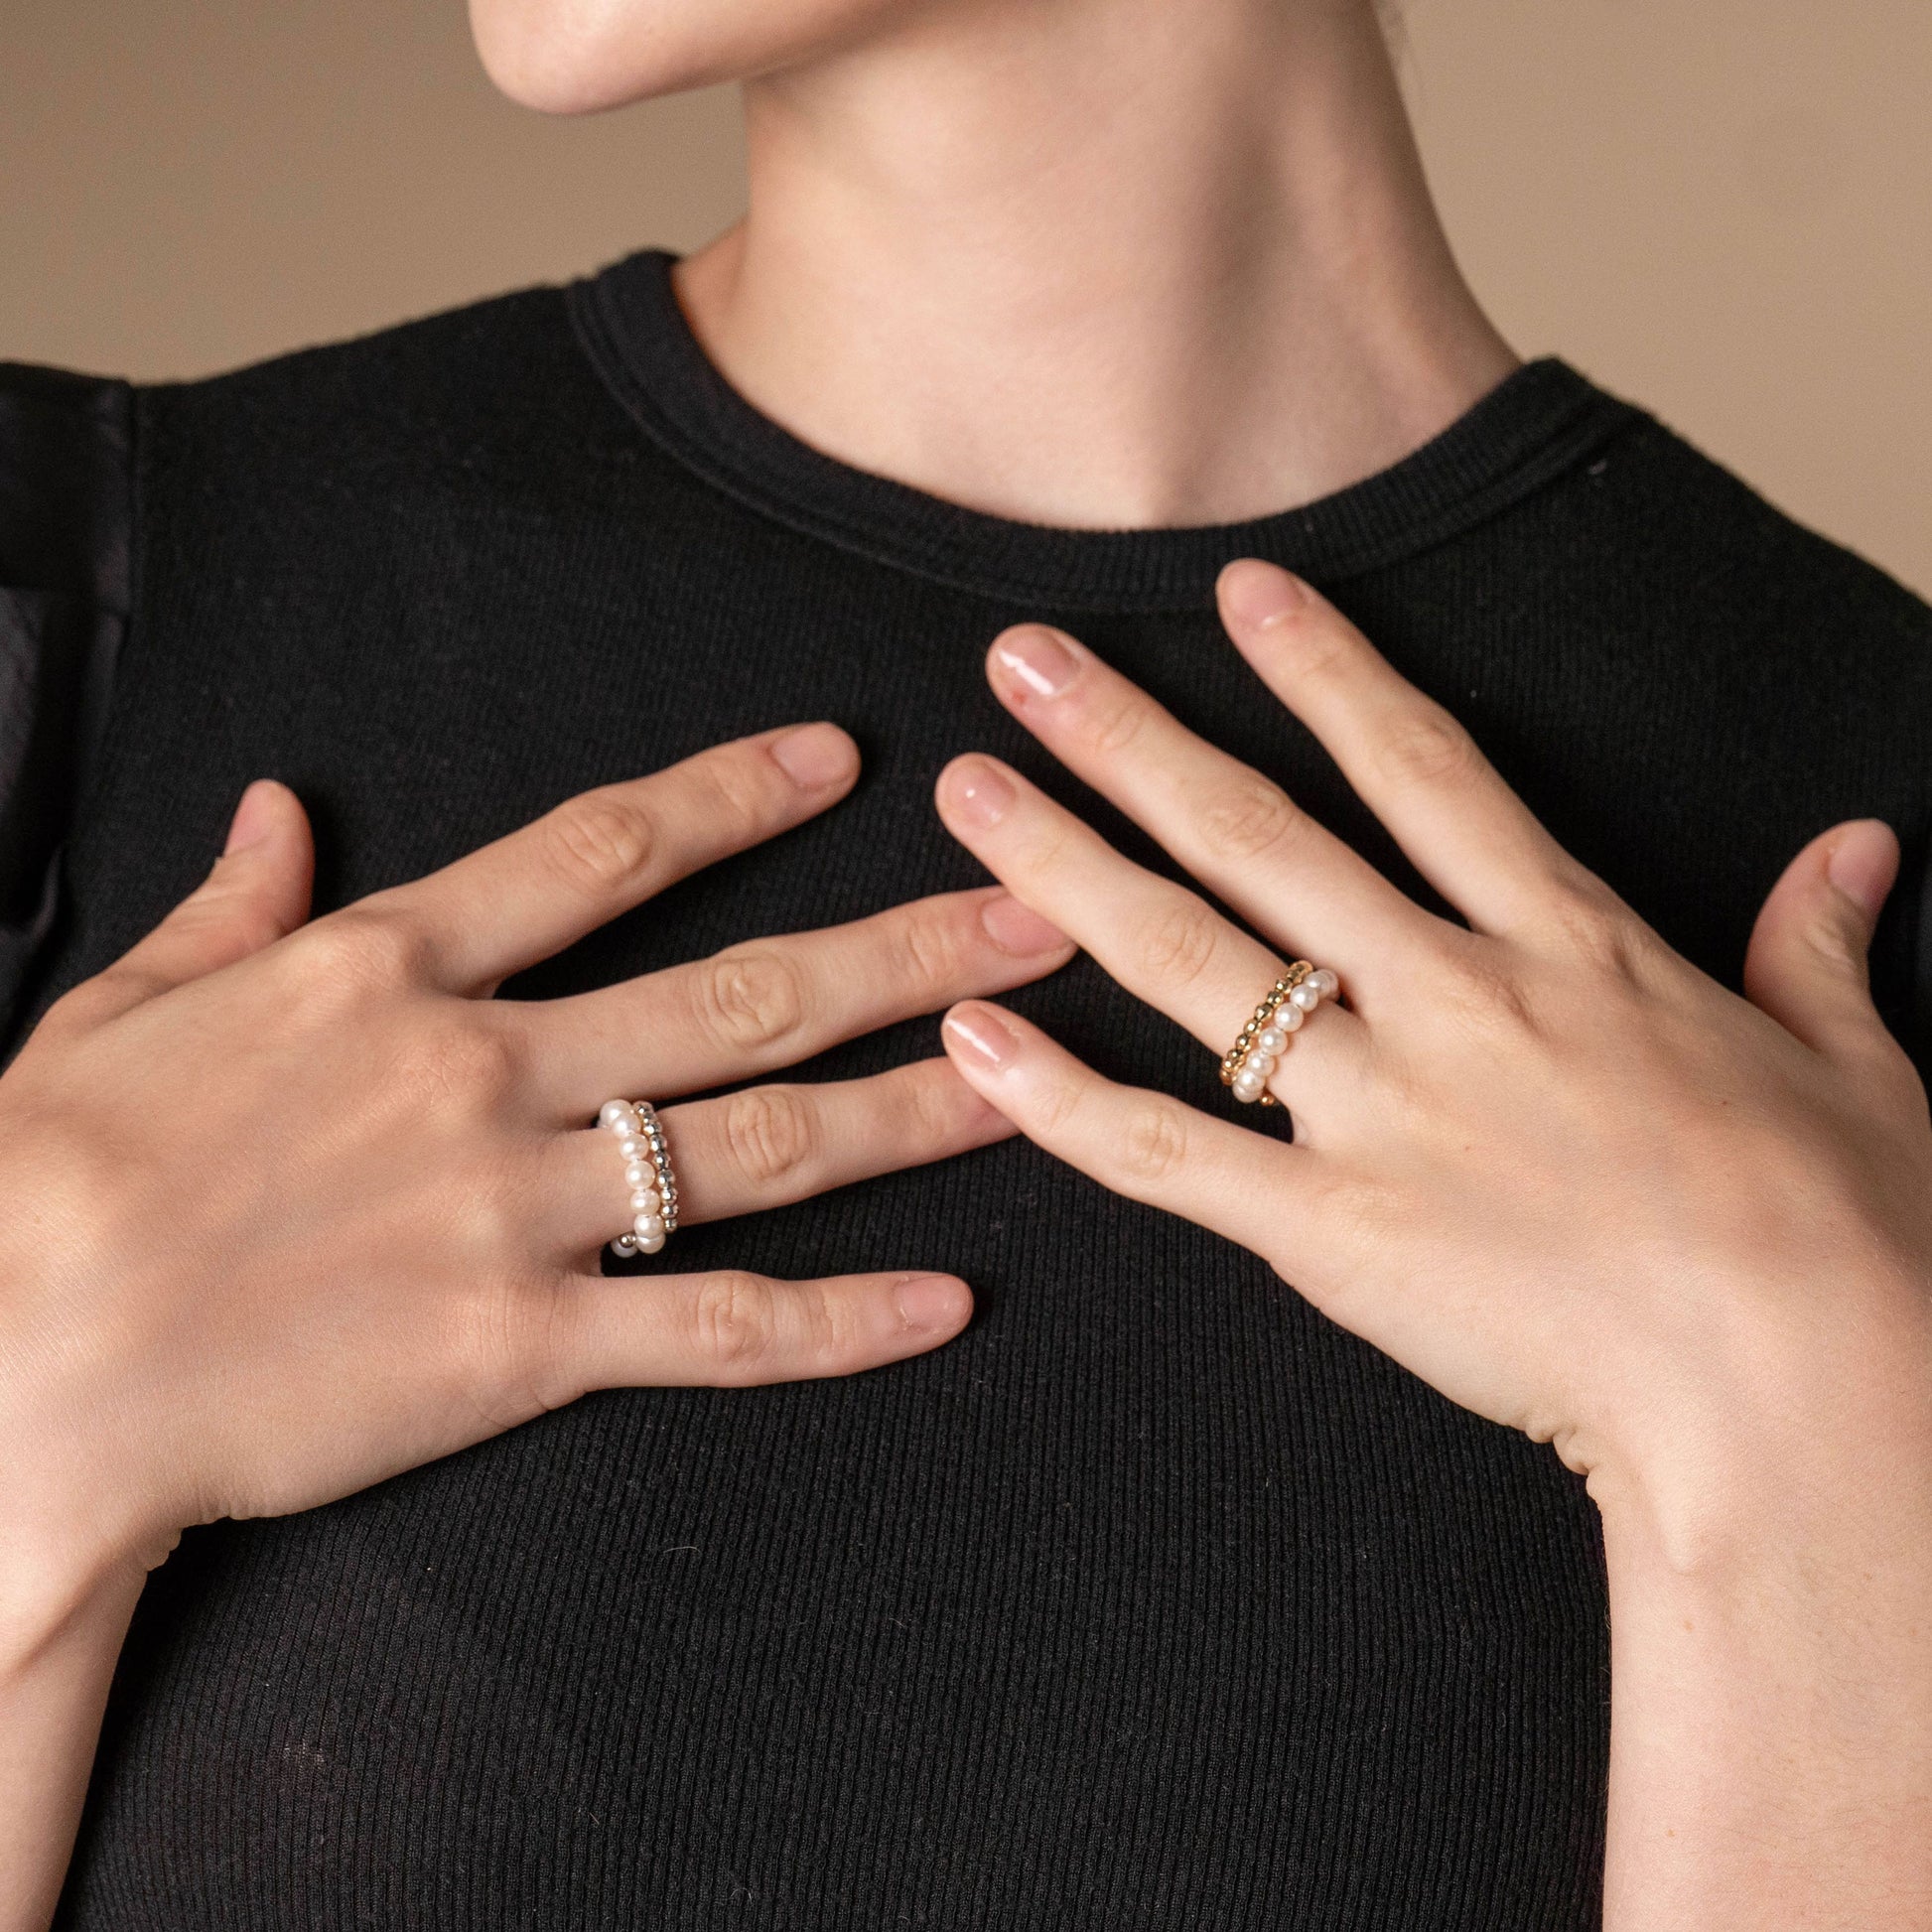 Elevate your style with the captivating Spiral Pearl x Gold Ring, gracefully showcased on a woman's hands.